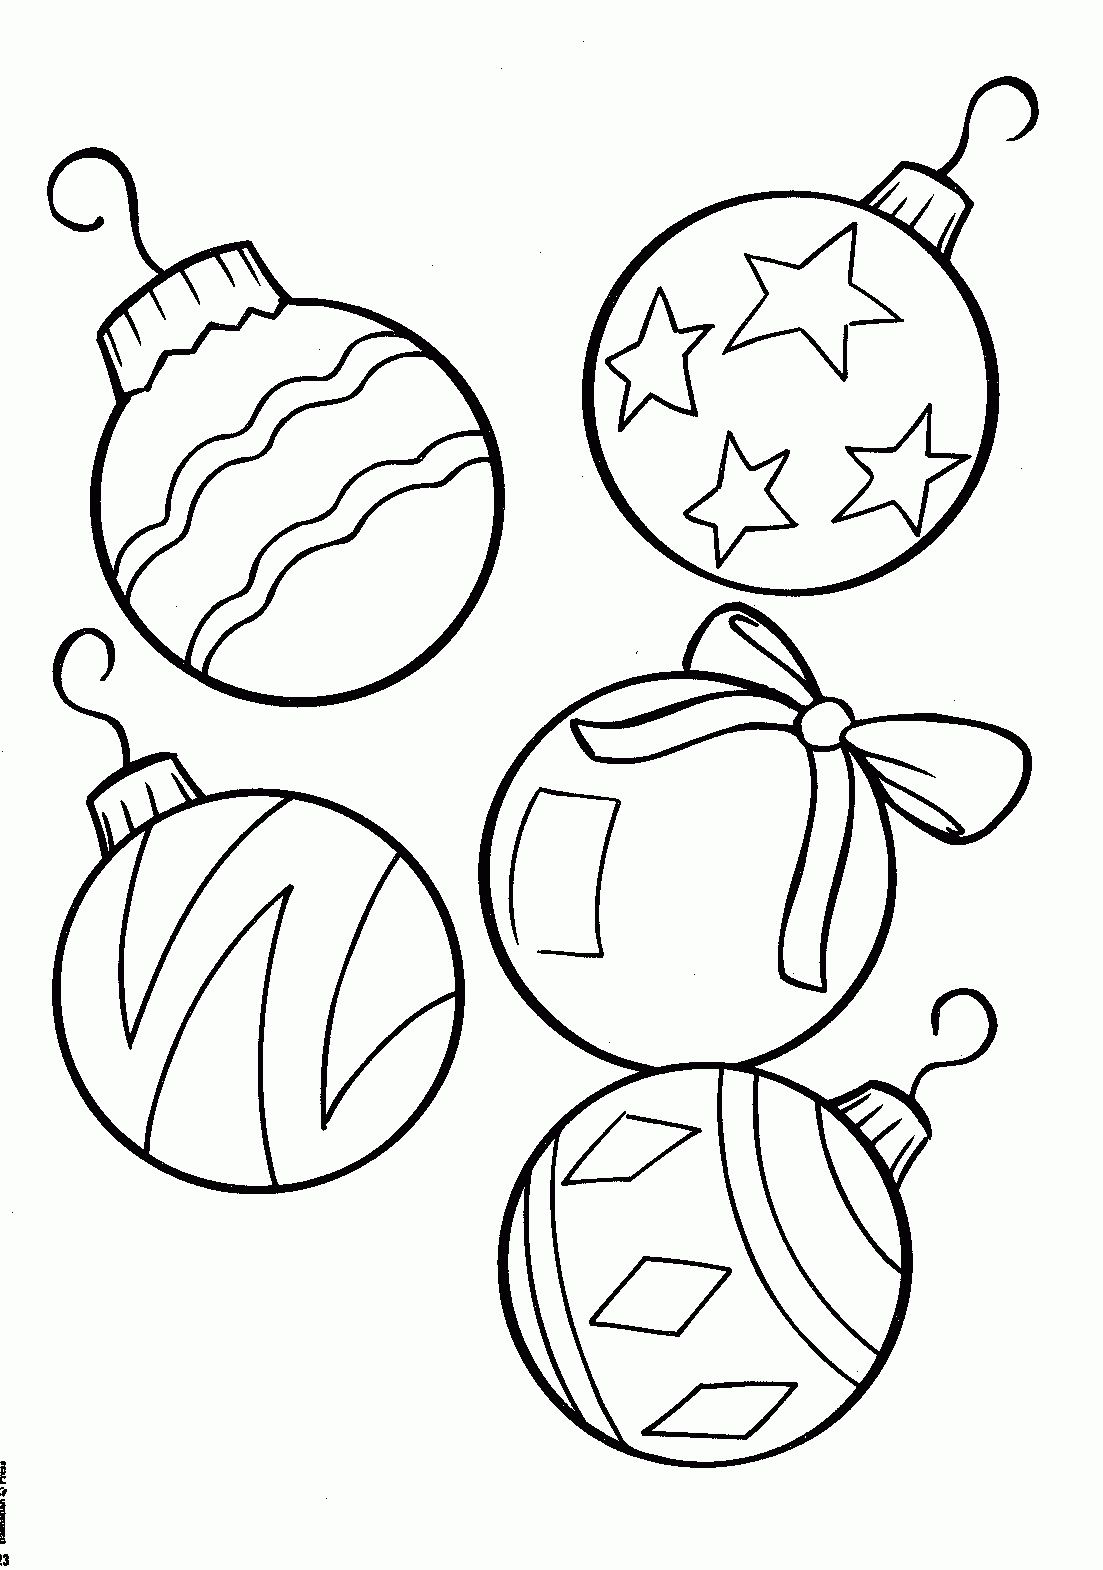 Ball Ornaments - Christmas Coloring Pages - Free Large Images - Free Printable Christmas Ornaments